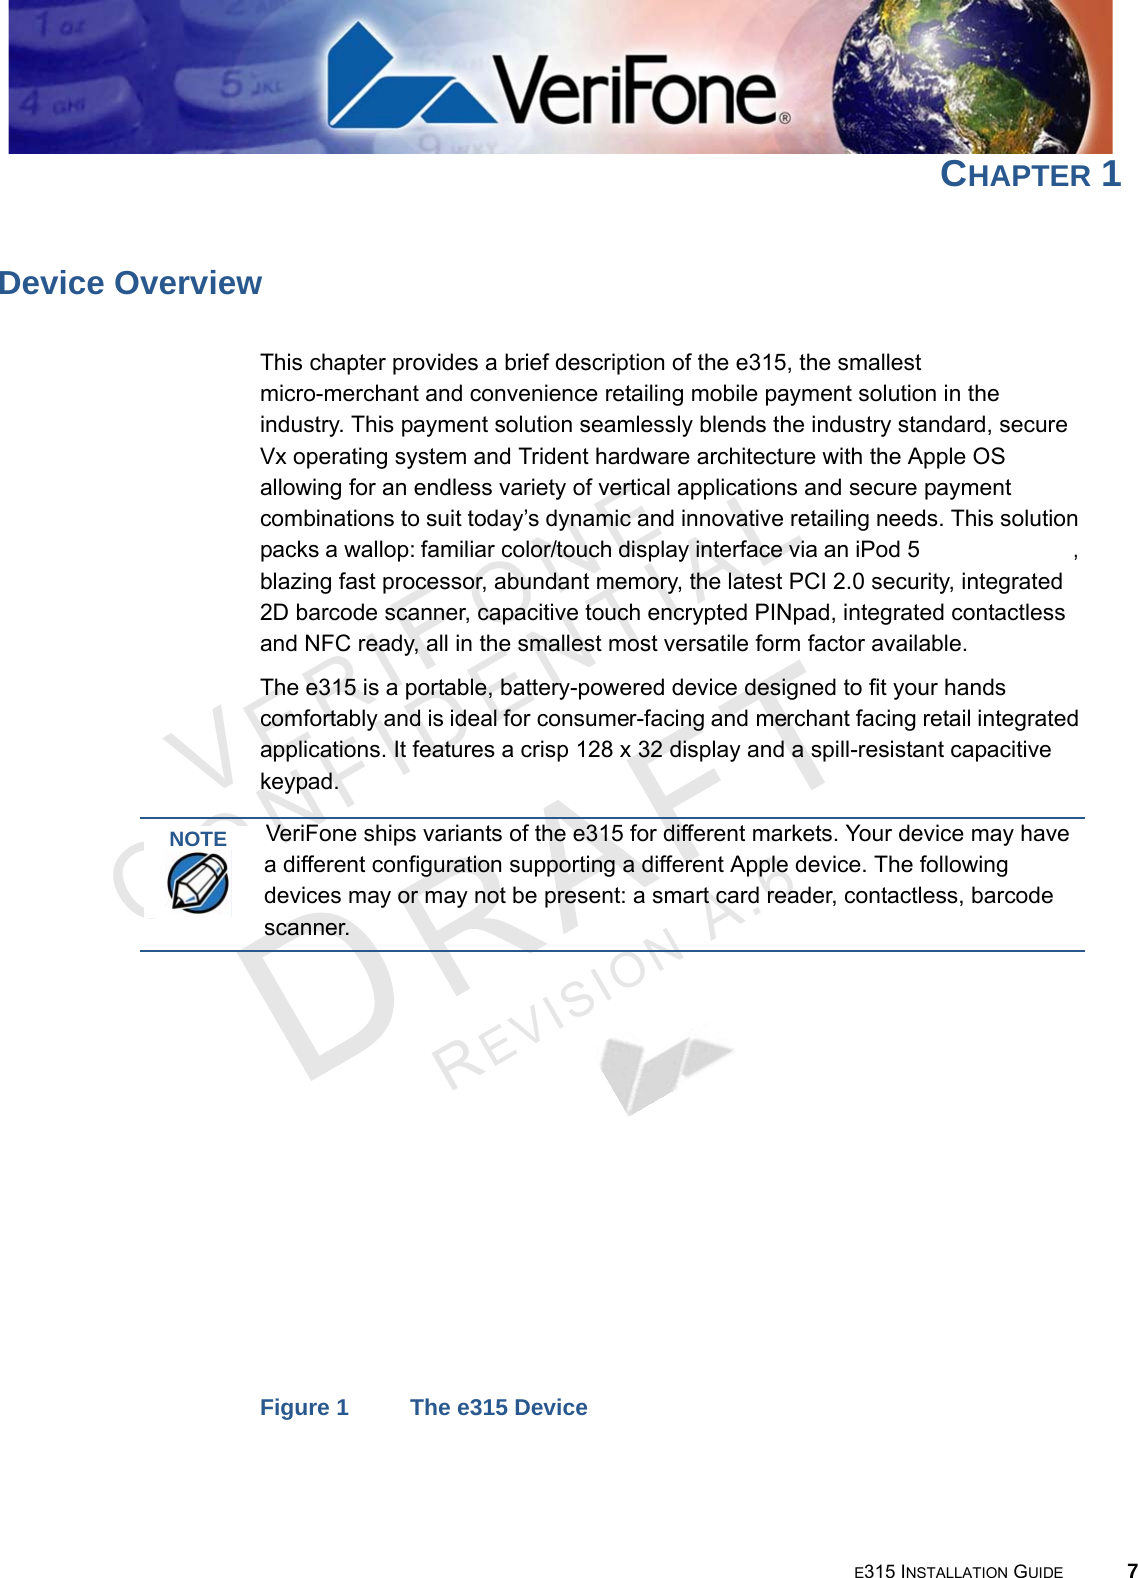 E315 INSTALLATION GUIDE 7VERIFO N ECONF I DENTIALREVISION A.6 CHAPTER 1Device OverviewThis chapter provides a brief description of the e315, the smallest  micro-merchant and convenience retailing mobile payment solution in the industry. This payment solution seamlessly blends the industry standard, secure Vx operating system and Trident hardware architecture with the Apple OS allowing for an endless variety of vertical applications and secure payment combinations to suit today’s dynamic and innovative retailing needs. This solution packs a wallop: familiar color/touch display interface via an iPod 5 or an iPhone 5, blazing fast processor, abundant memory, the latest PCI 2.0 security, integrated 2D barcode scanner, capacitive touch encrypted PINpad, integrated contactless and NFC ready, all in the smallest most versatile form factor available.The e315 is a portable, battery-powered device designed to fit your hands comfortably and is ideal for consumer-facing and merchant facing retail integrated applications. It features a crisp 128 x 32 display and a spill-resistant capacitive keypad.Figure 1 The e315 DeviceNOTEVeriFone ships variants of the e315 for different markets. Your device may have a different configuration supporting a different Apple device. The following devices may or may not be present: a smart card reader, contactless, barcode scanner.